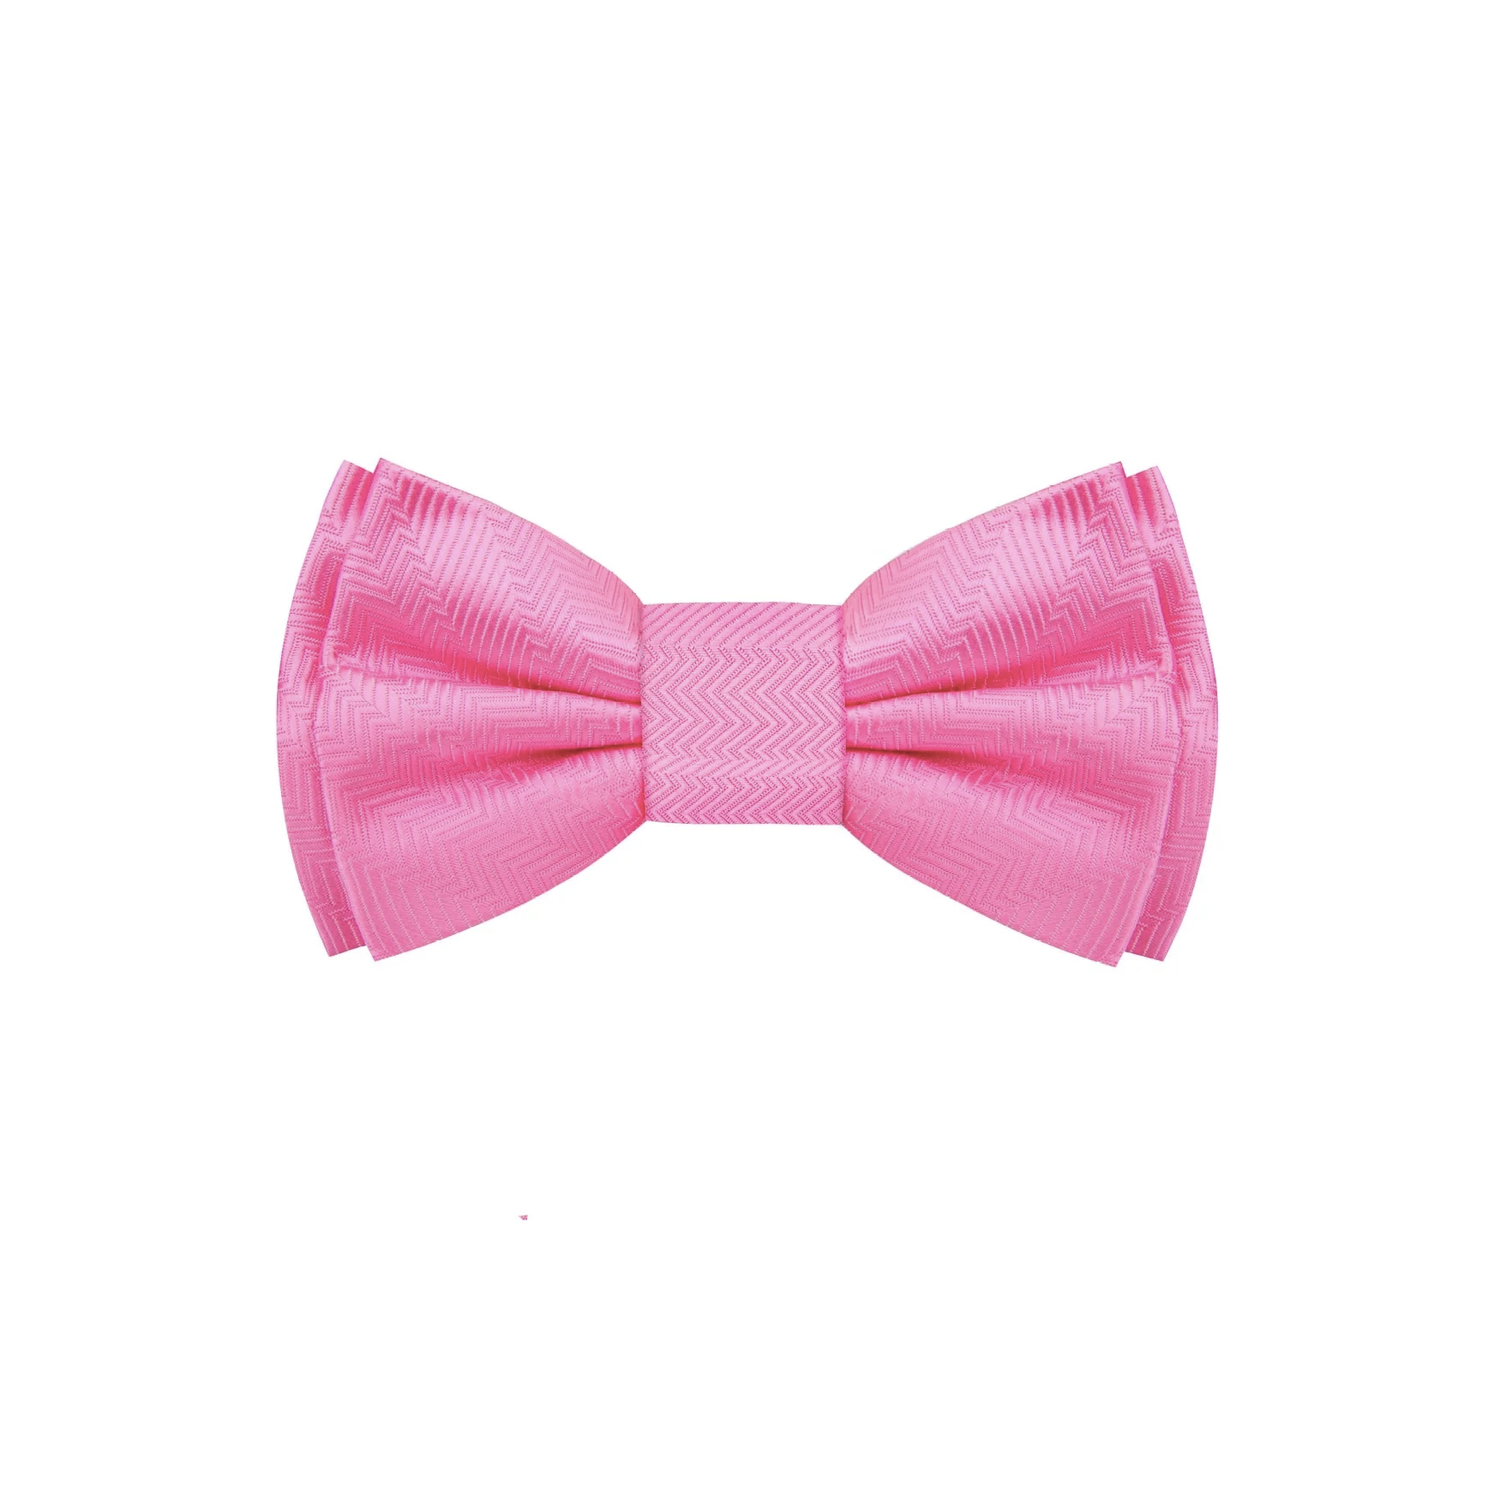 A Real Pink Solid Pattern Self Tie Bow Tie